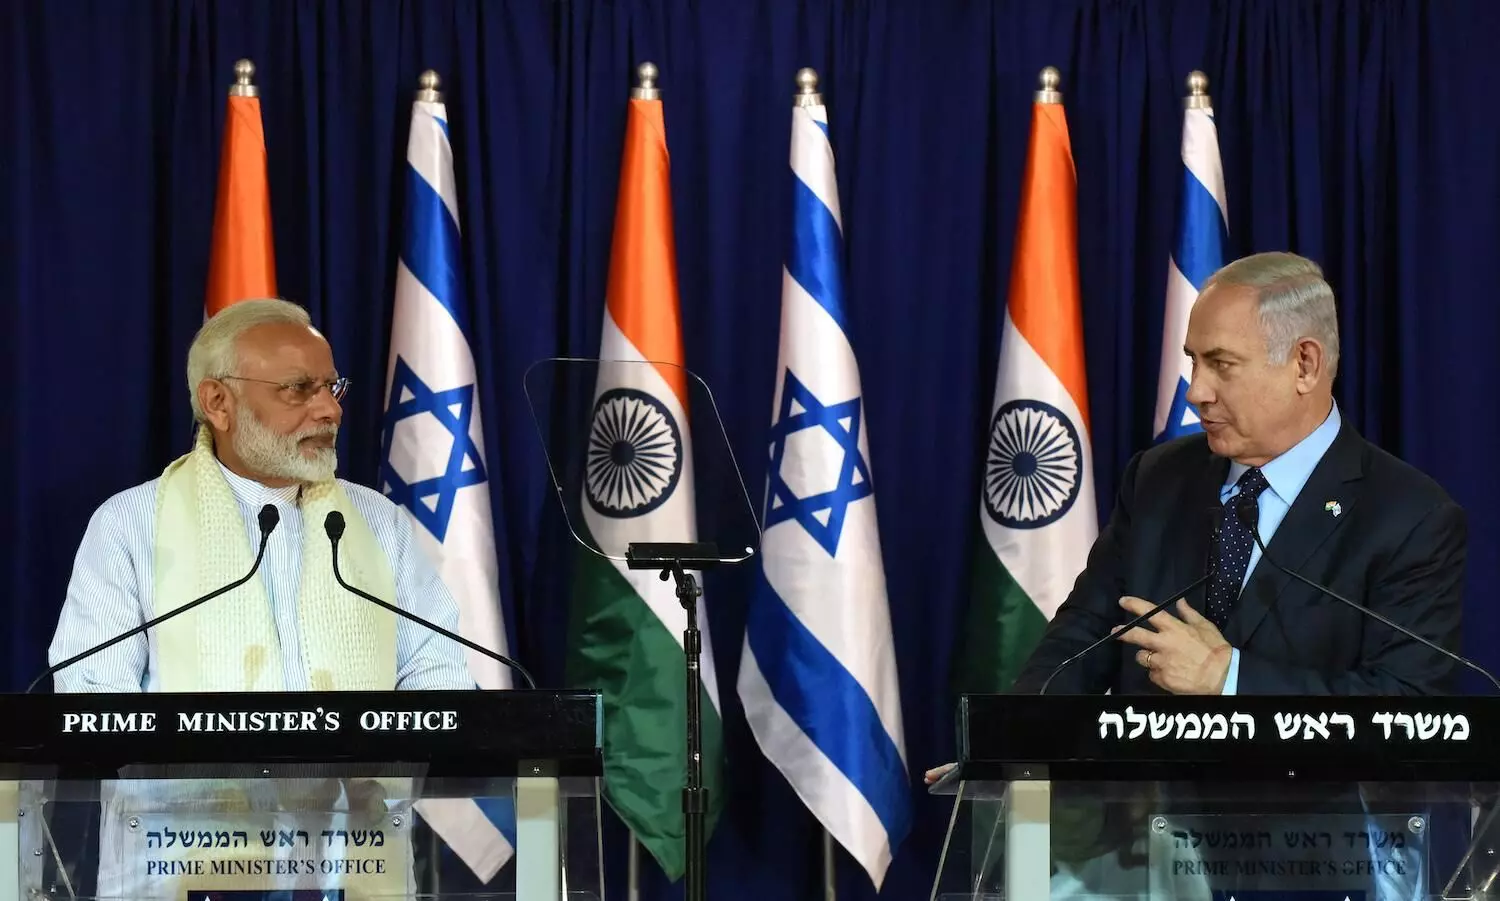 Indias evolving policy on Israel-Palestine conflict